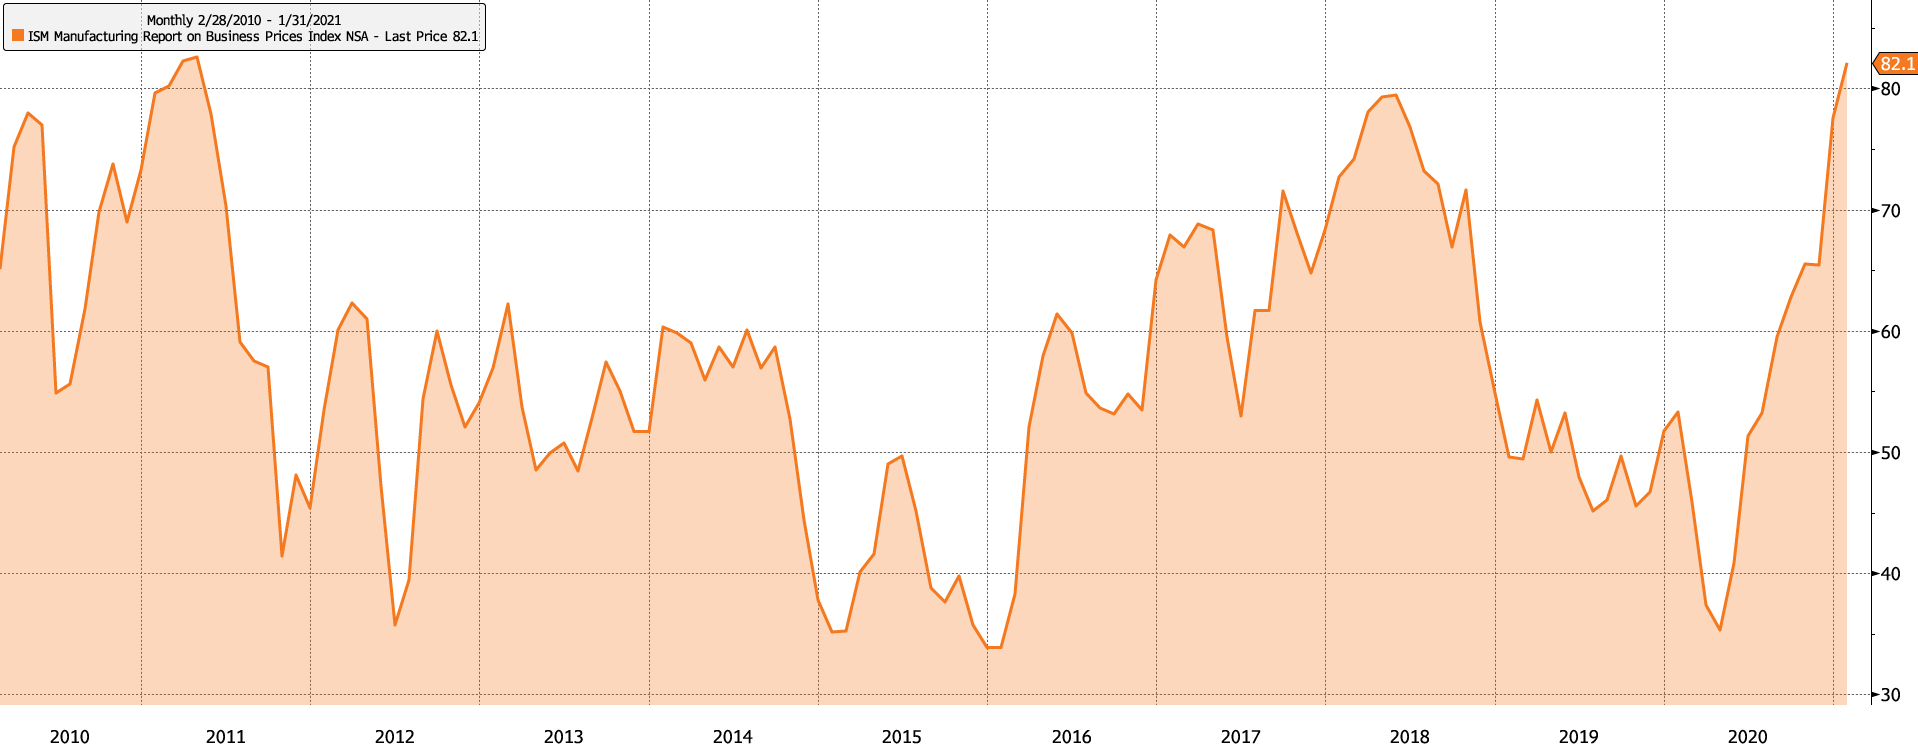 ISM-Business-Prices-Index-202-7-21